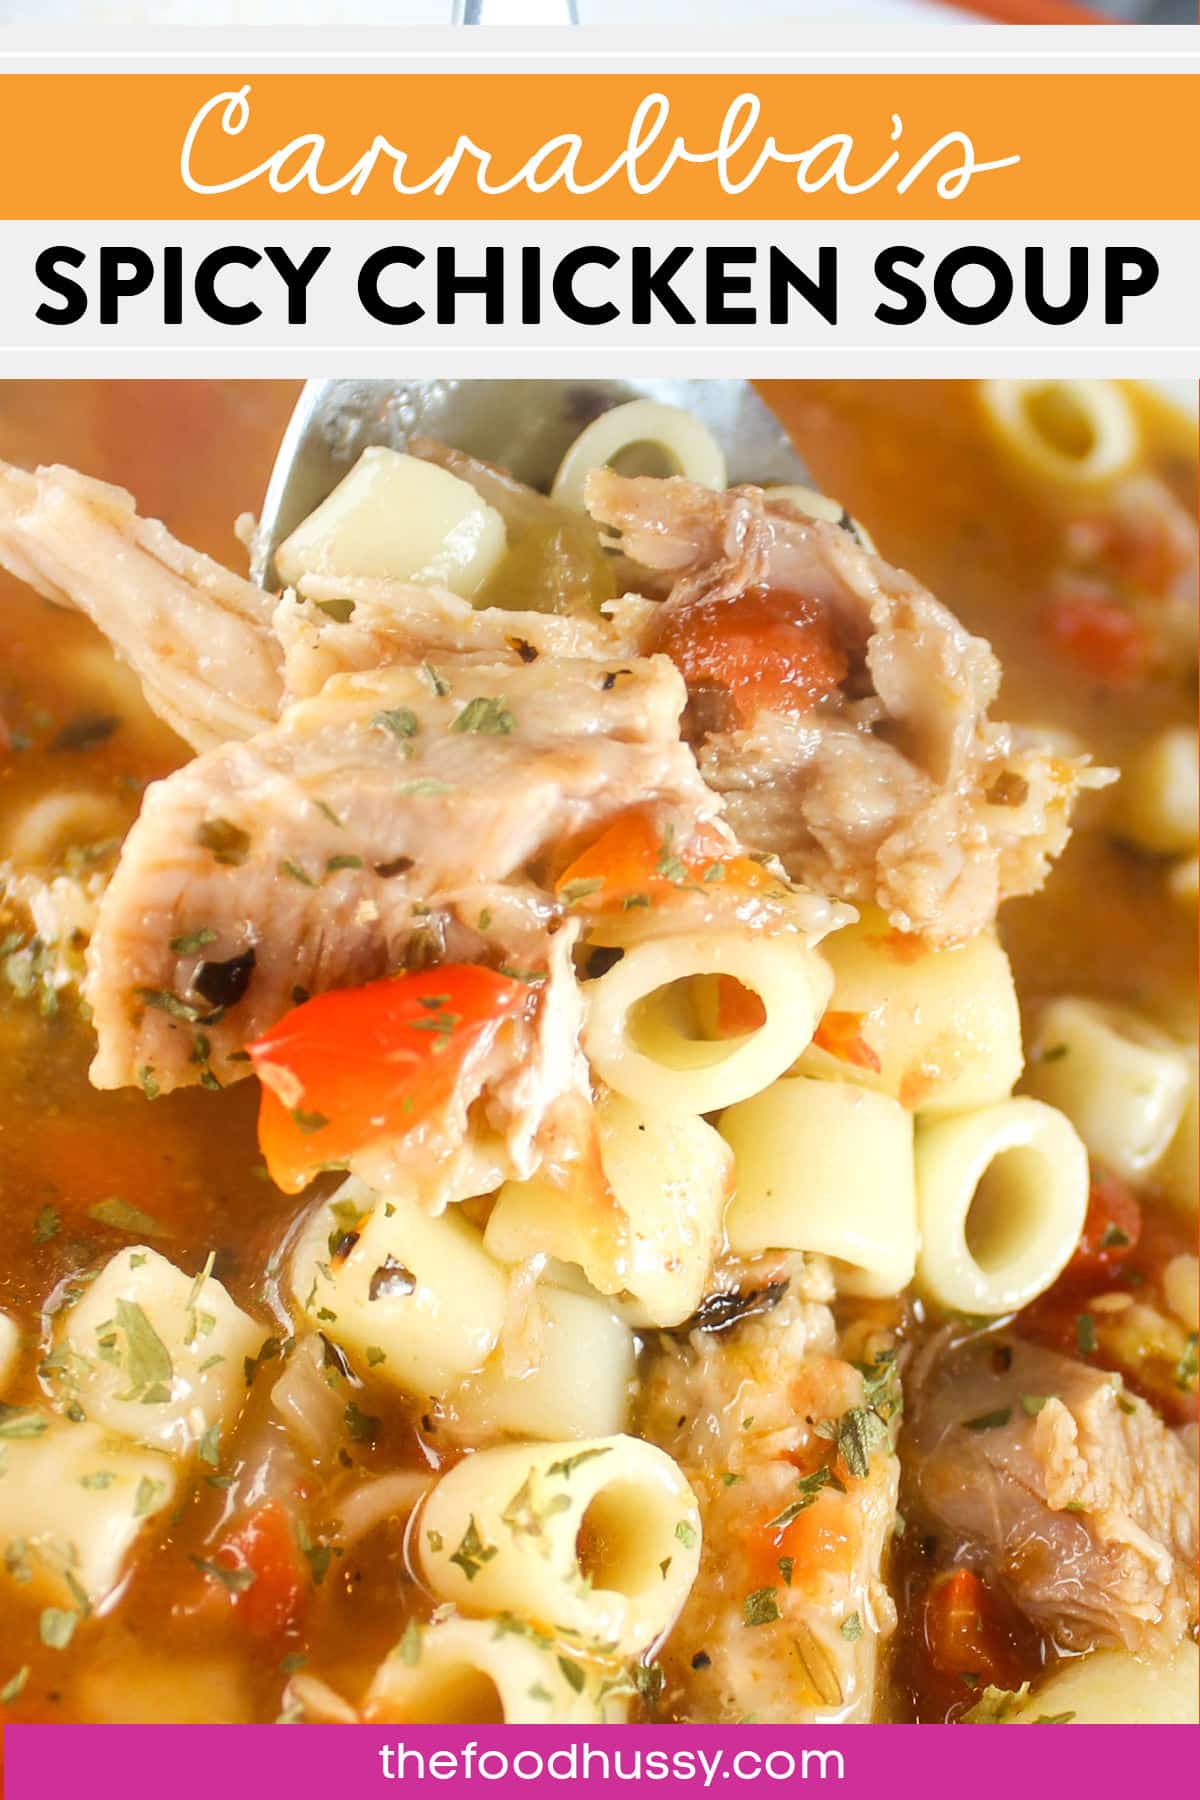 Carrabba's Spicy Chicken Soup is easily going down as my new go-to soup recipe! It's layered with flavors and oh-so comforting!!!! Plus - I used leftover rotisserie chicken to make it even quicker.  via @foodhussy